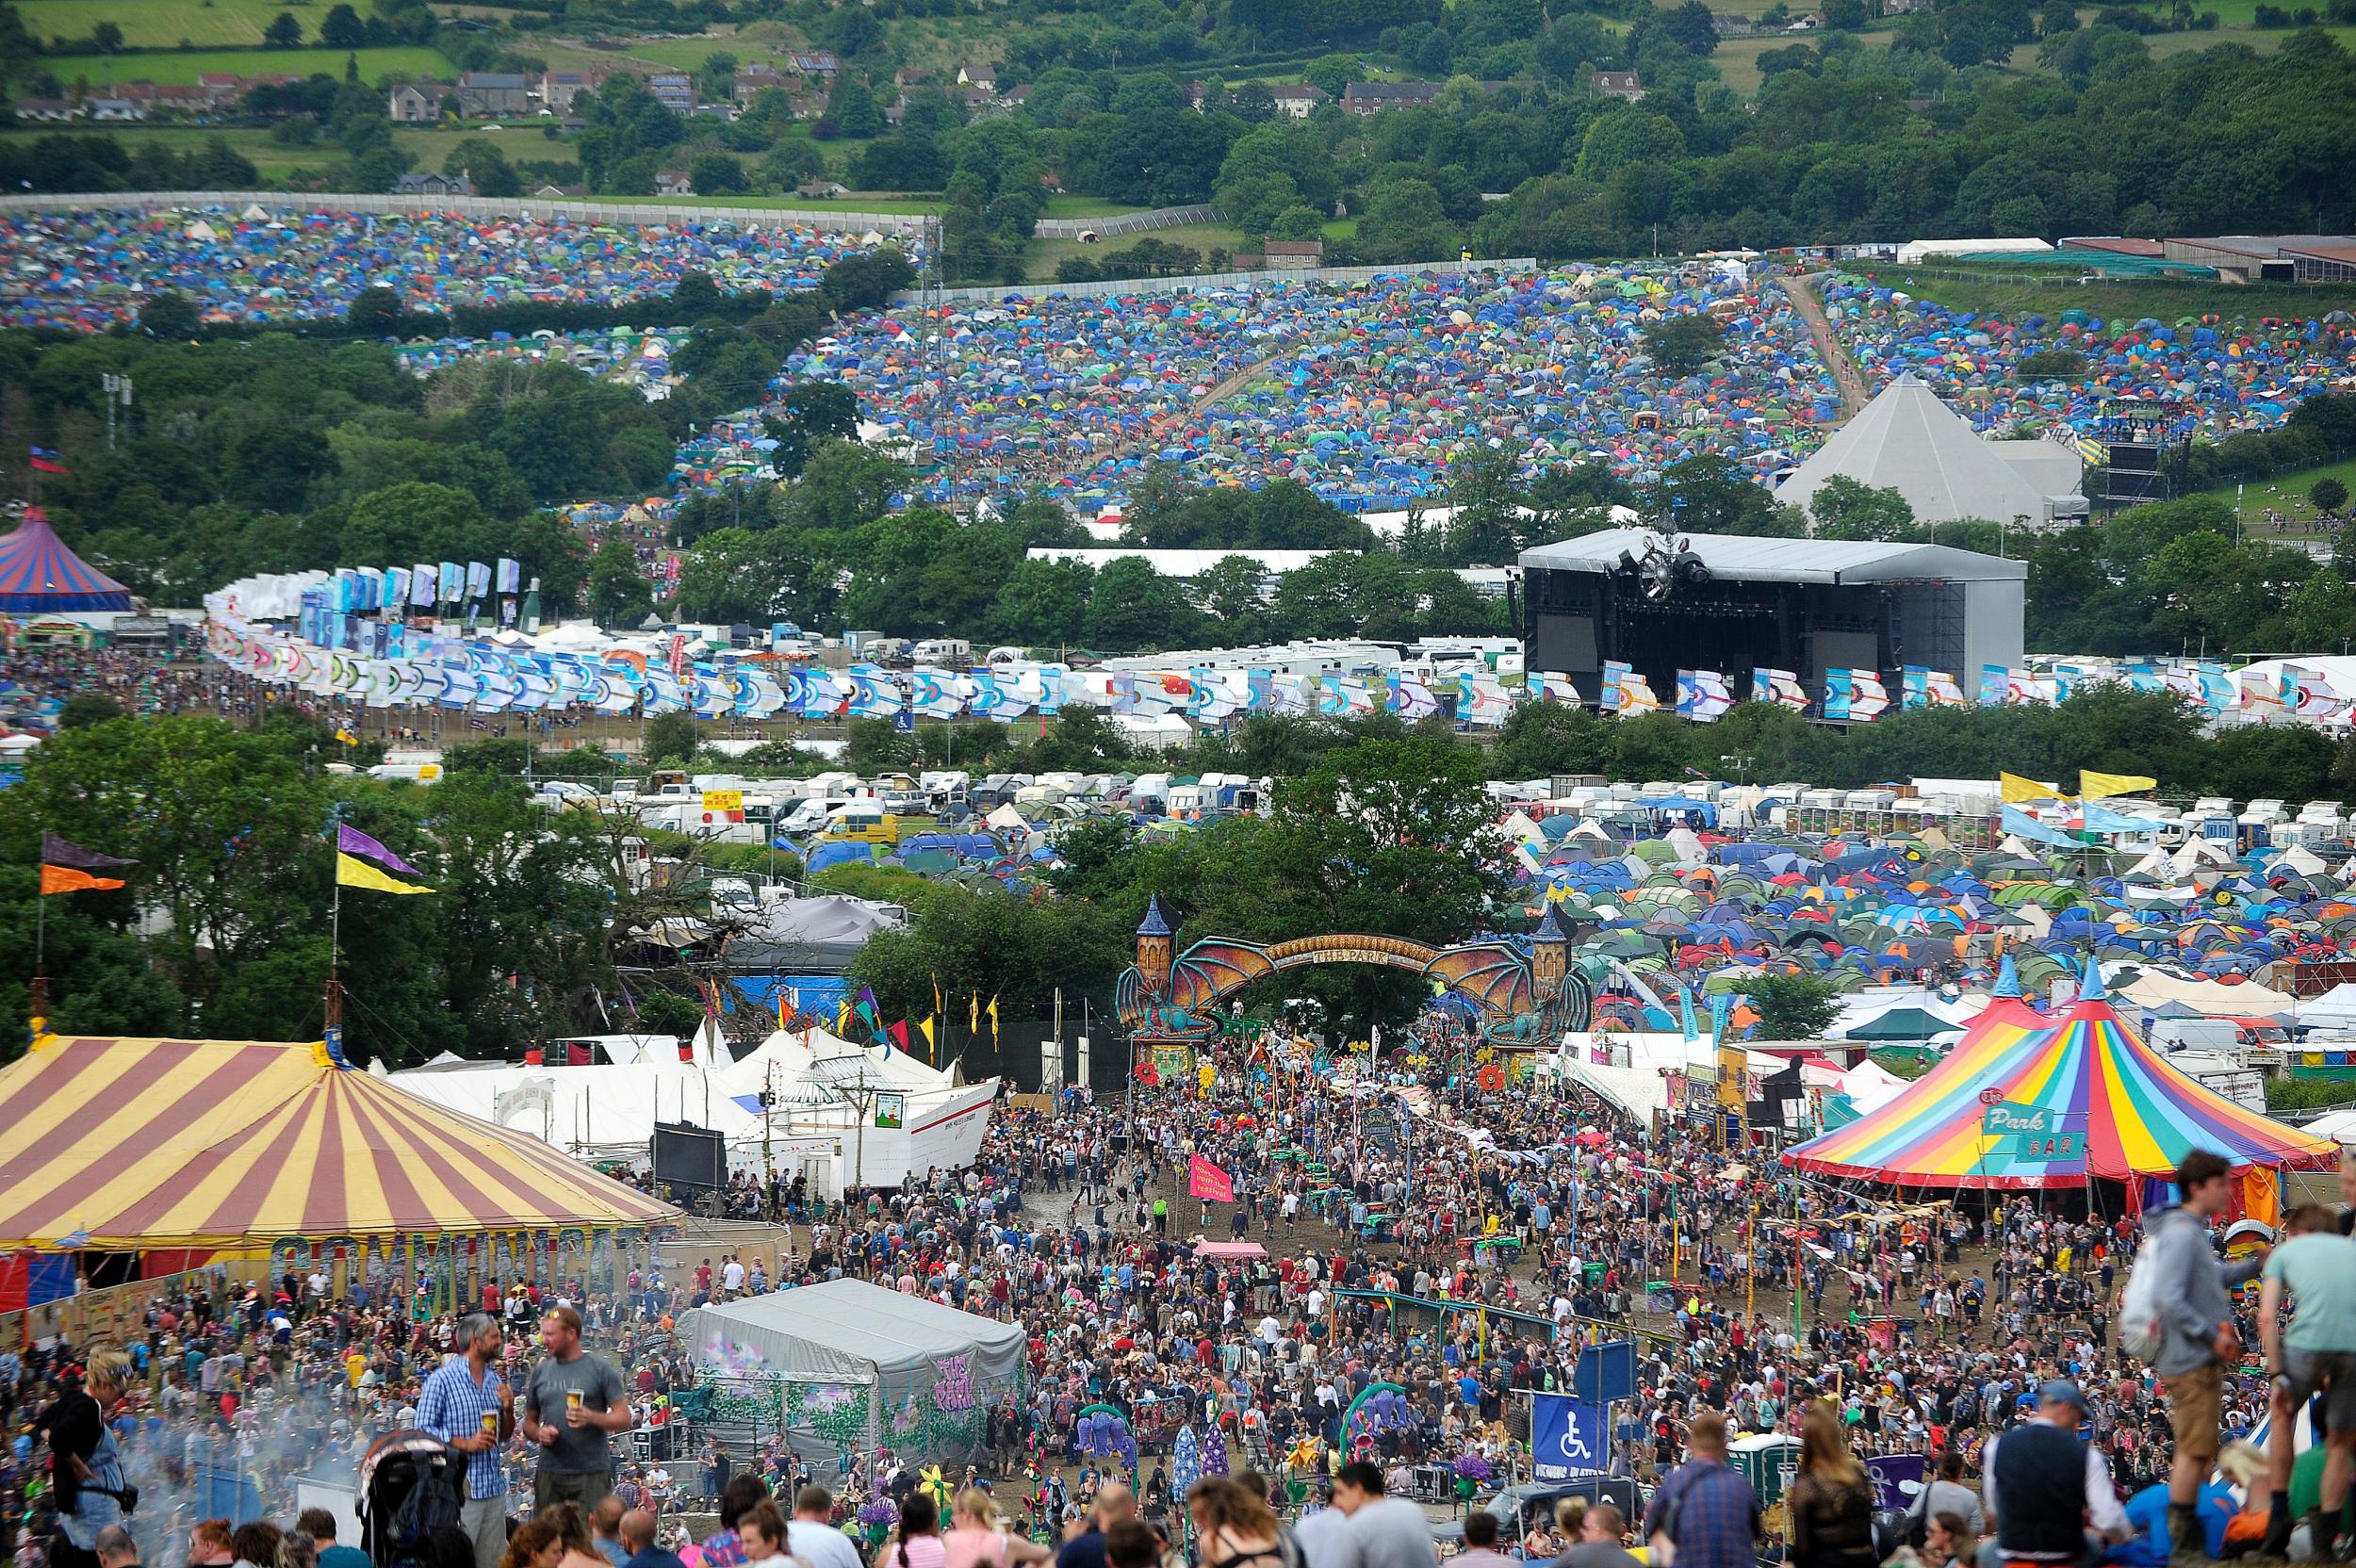 Glastonbury is one of the largest festivals in the world